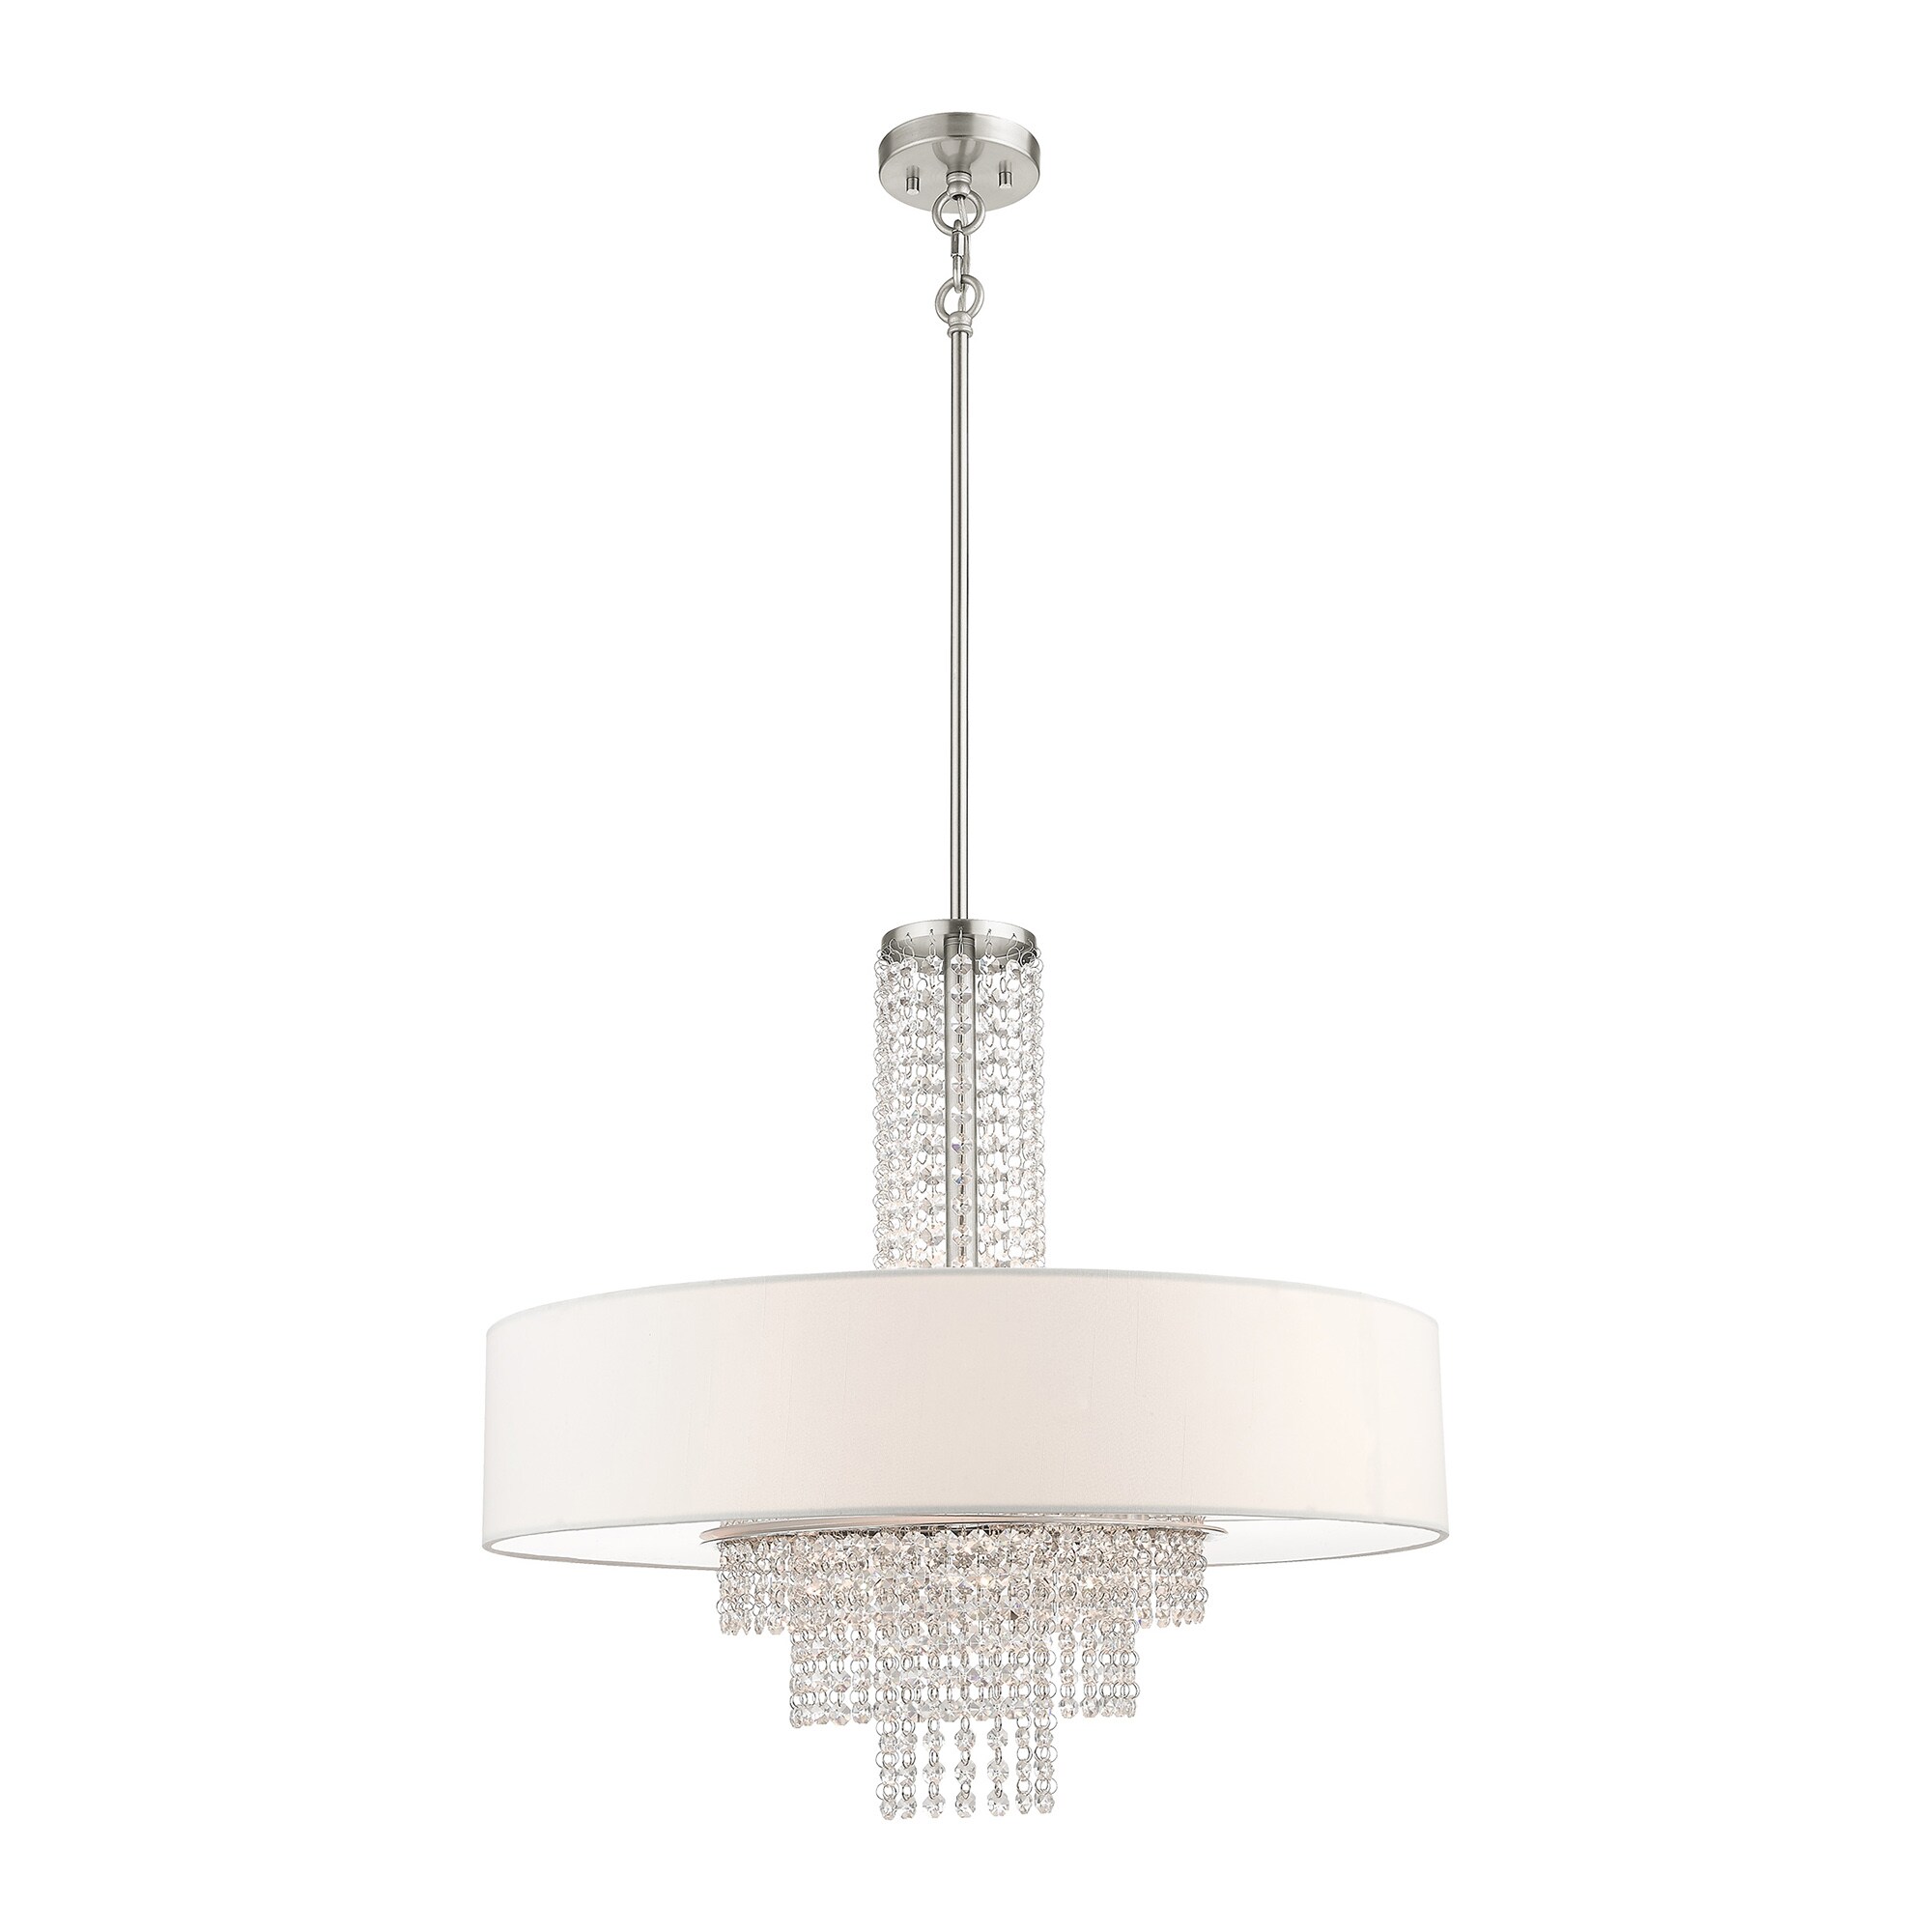 Brushed Nickel Finish with Satin White Acrylic Glass with Off-White Fabric Shade with Clear Crystal Five Light Chandelier Livex Lighting 51034-91 Carlisle